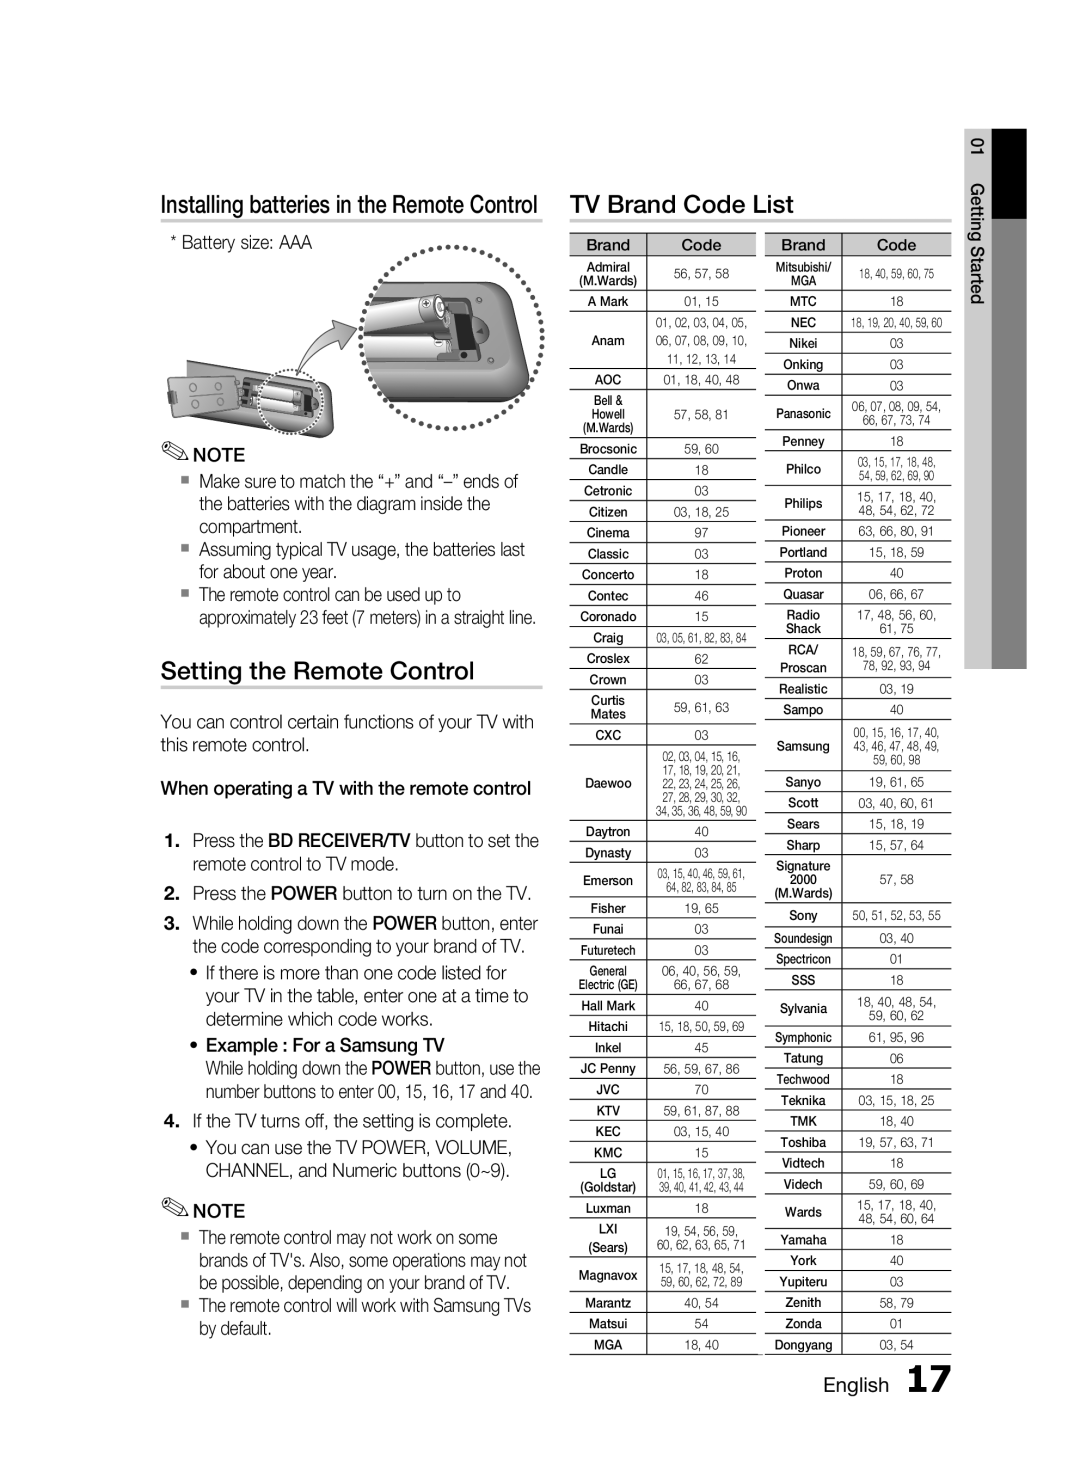 Samsung HT-C6530 TV Brand Code List, Setting the Remote Control, Installing batteries in the Remote Control, English 